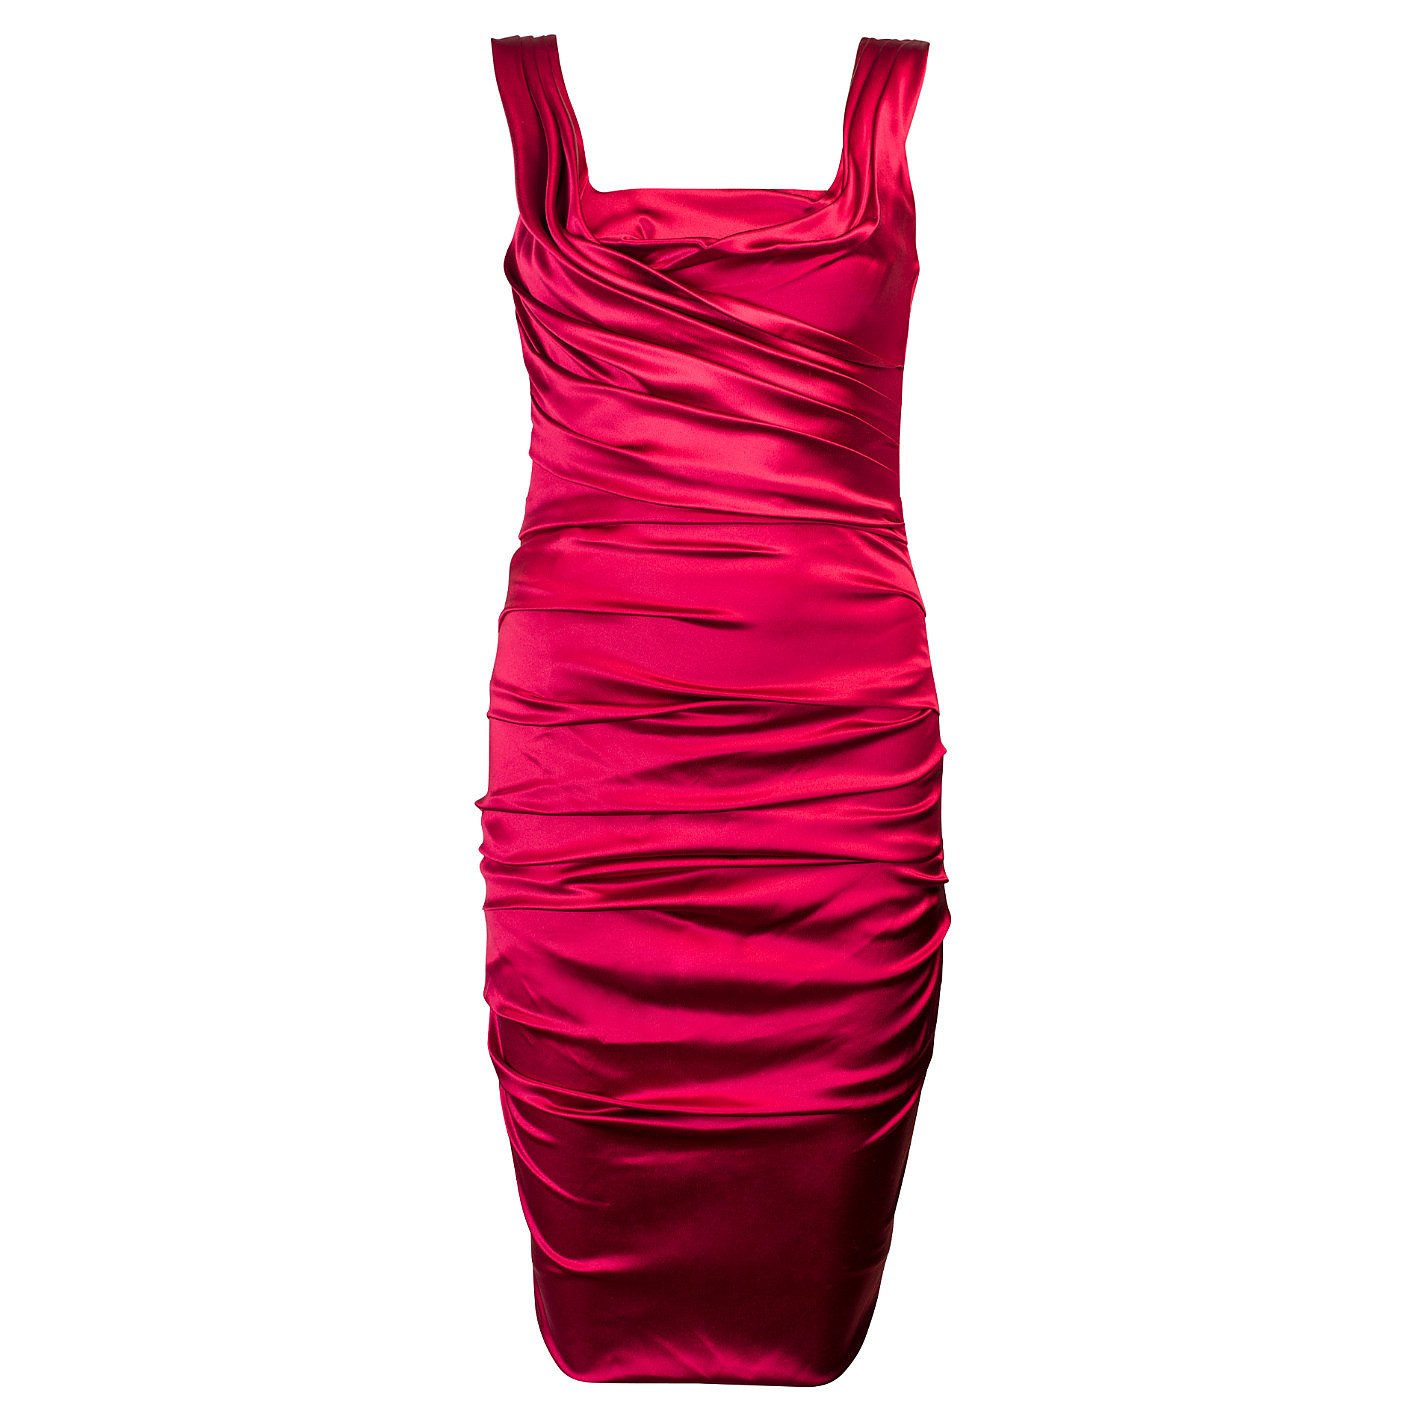 Rent or Buy DOLCE & GABBANA Ruched Stretch-Satin Dress from 